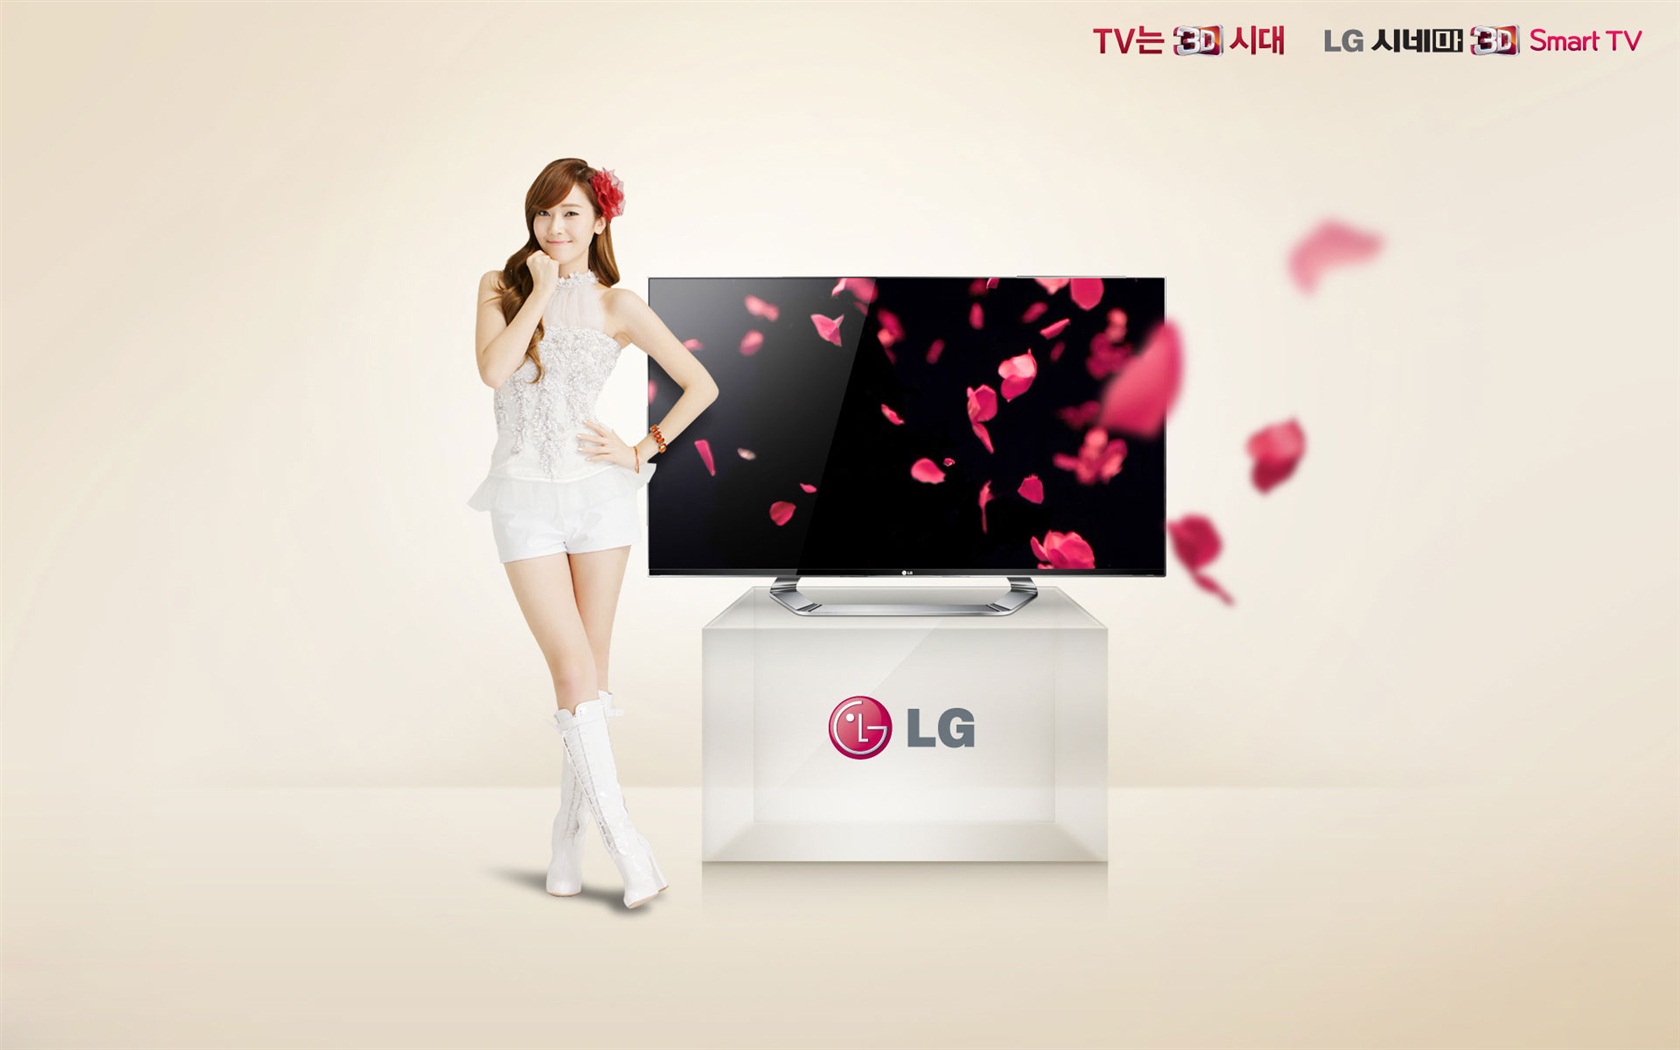 Girls Generation ACE and LG endorsements ads HD wallpapers #18 - 1680x1050